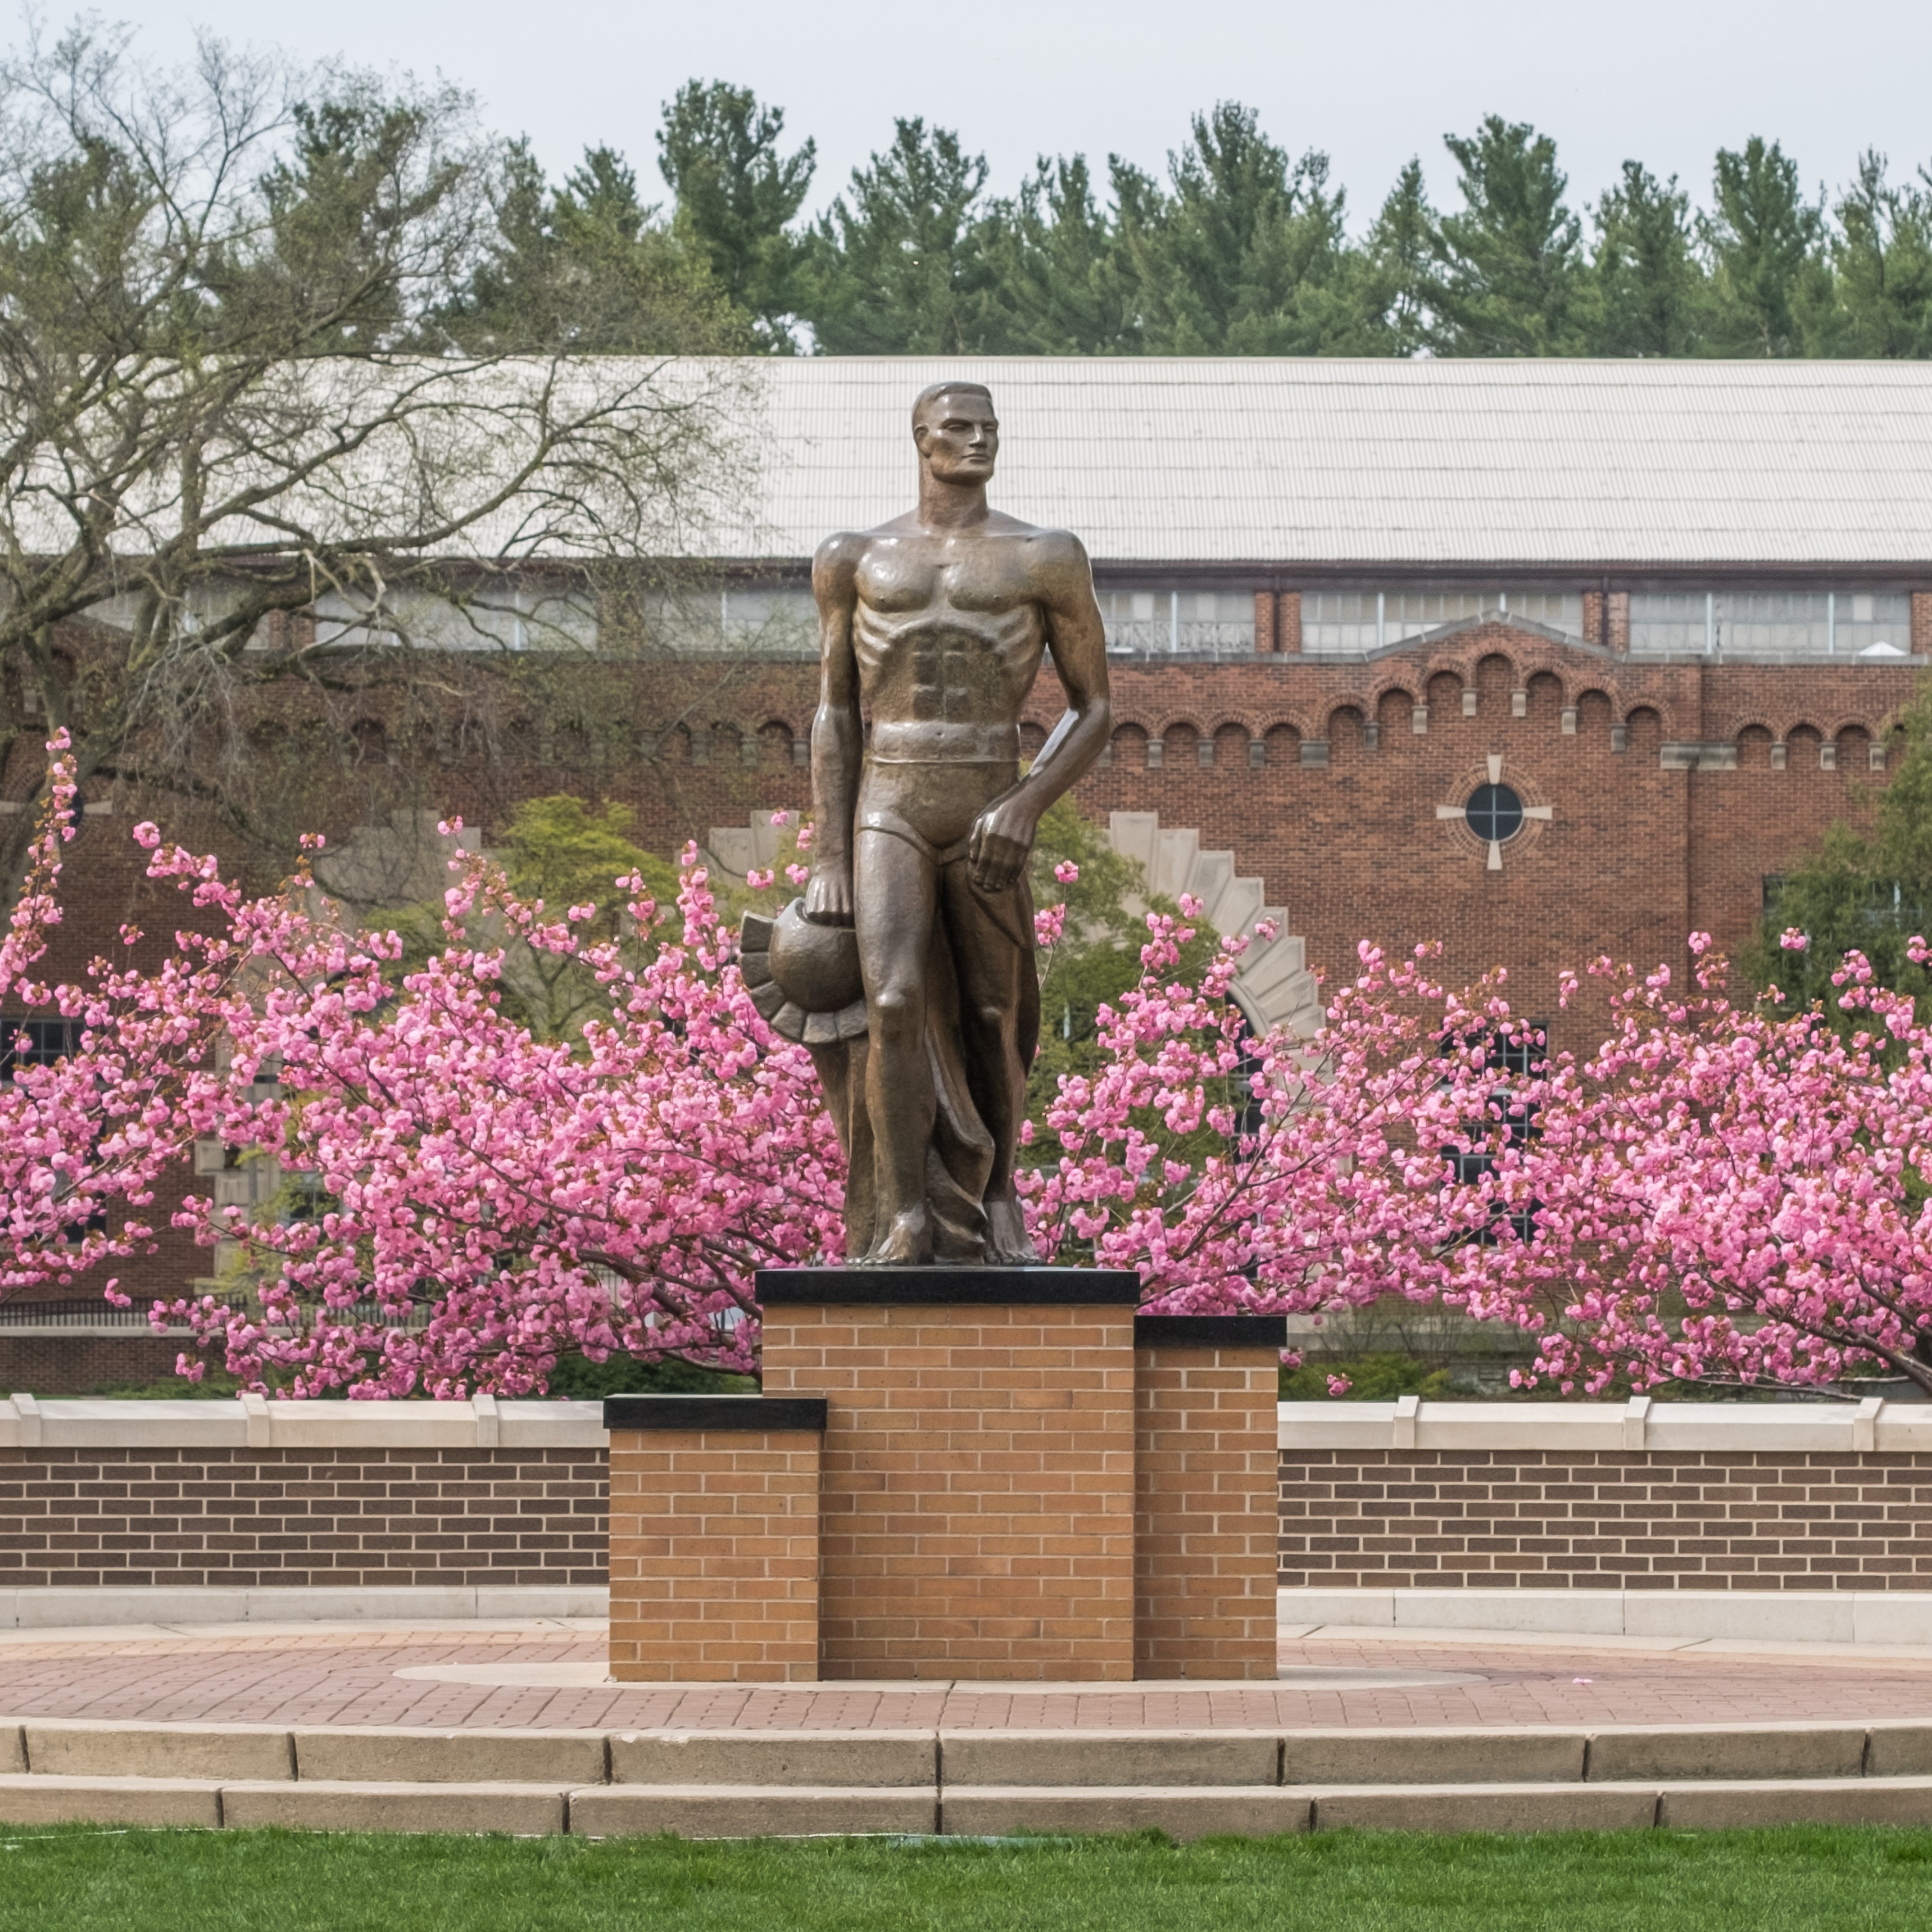 Sparty-statue-pink-flowering-trees-square